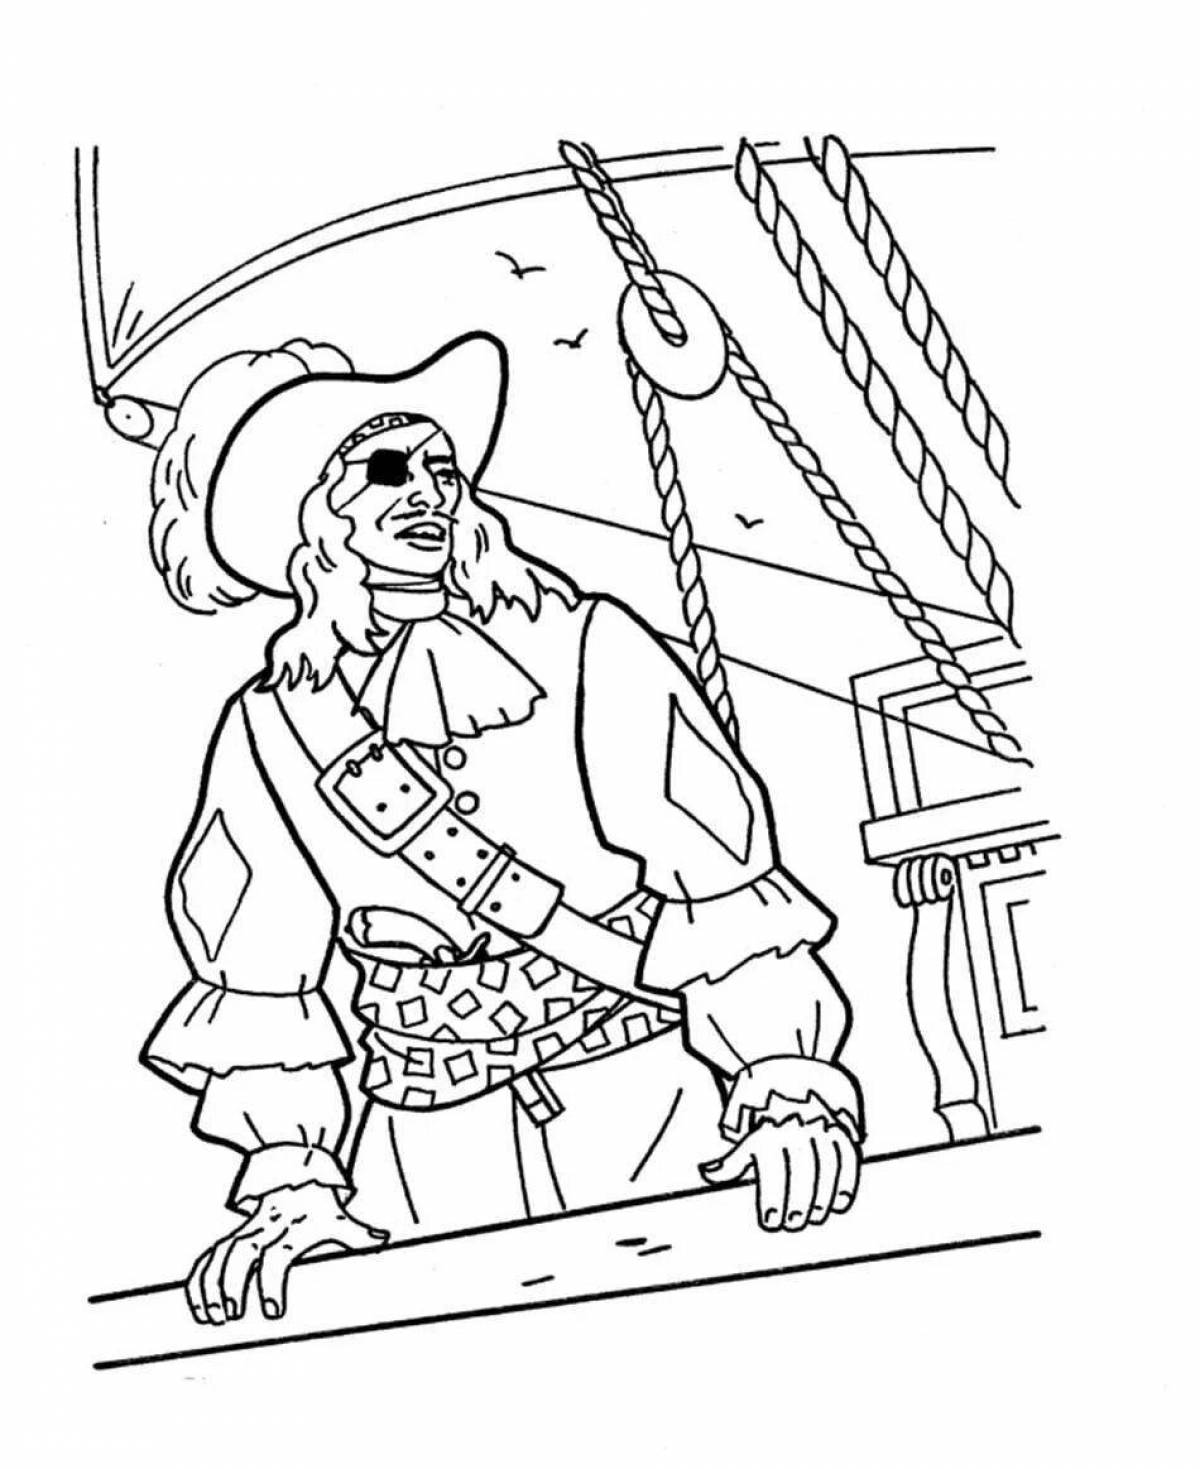 Pirates for kids #8